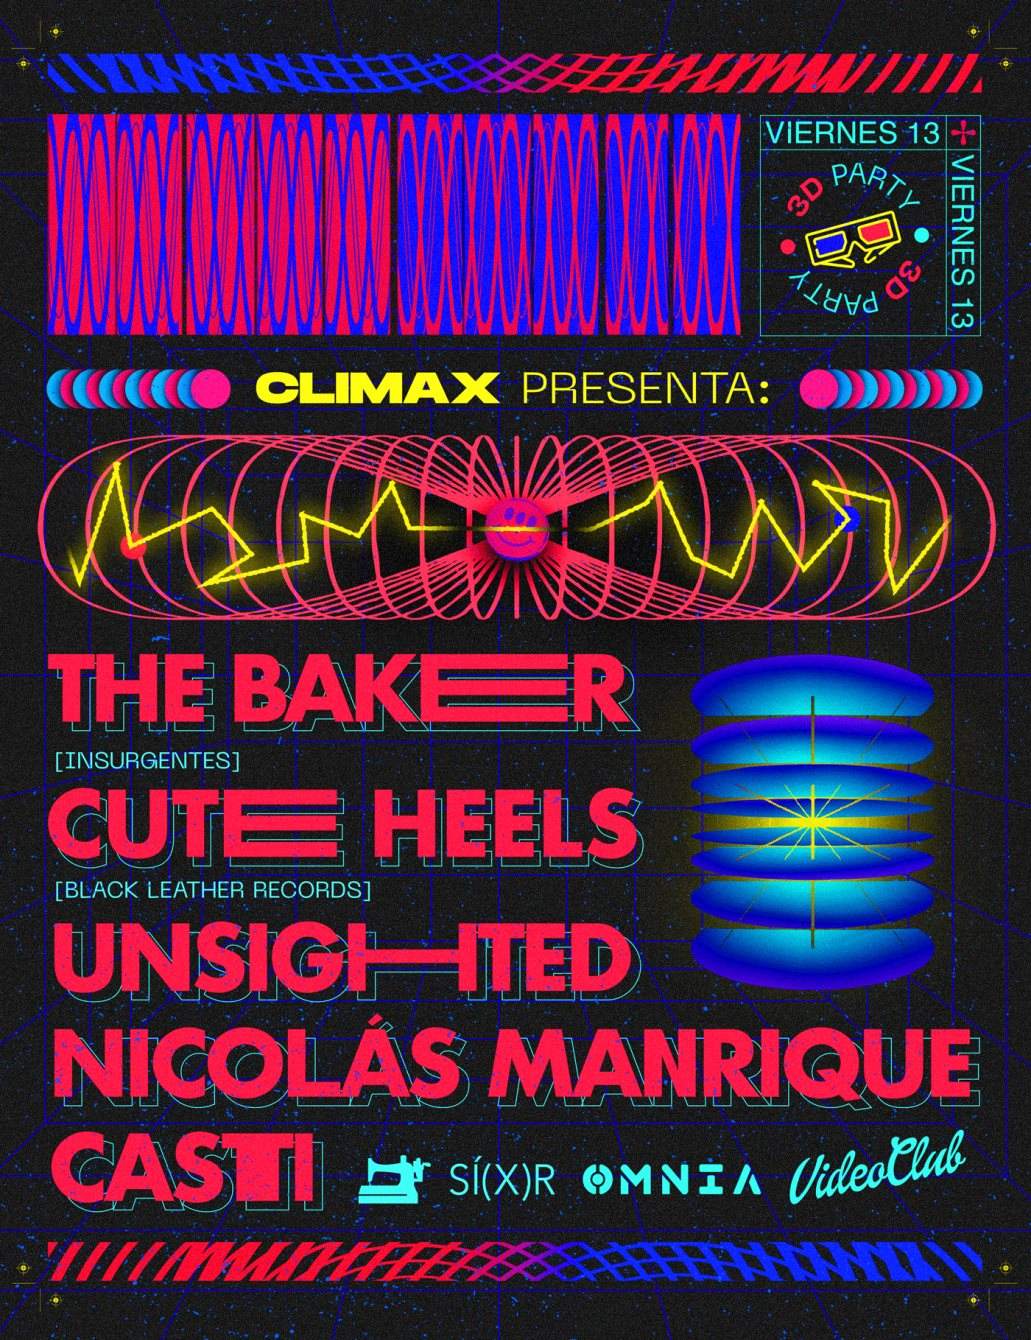 Climax by Omnia presents: The Baker / Cute Heels 3D Party - フライヤー表